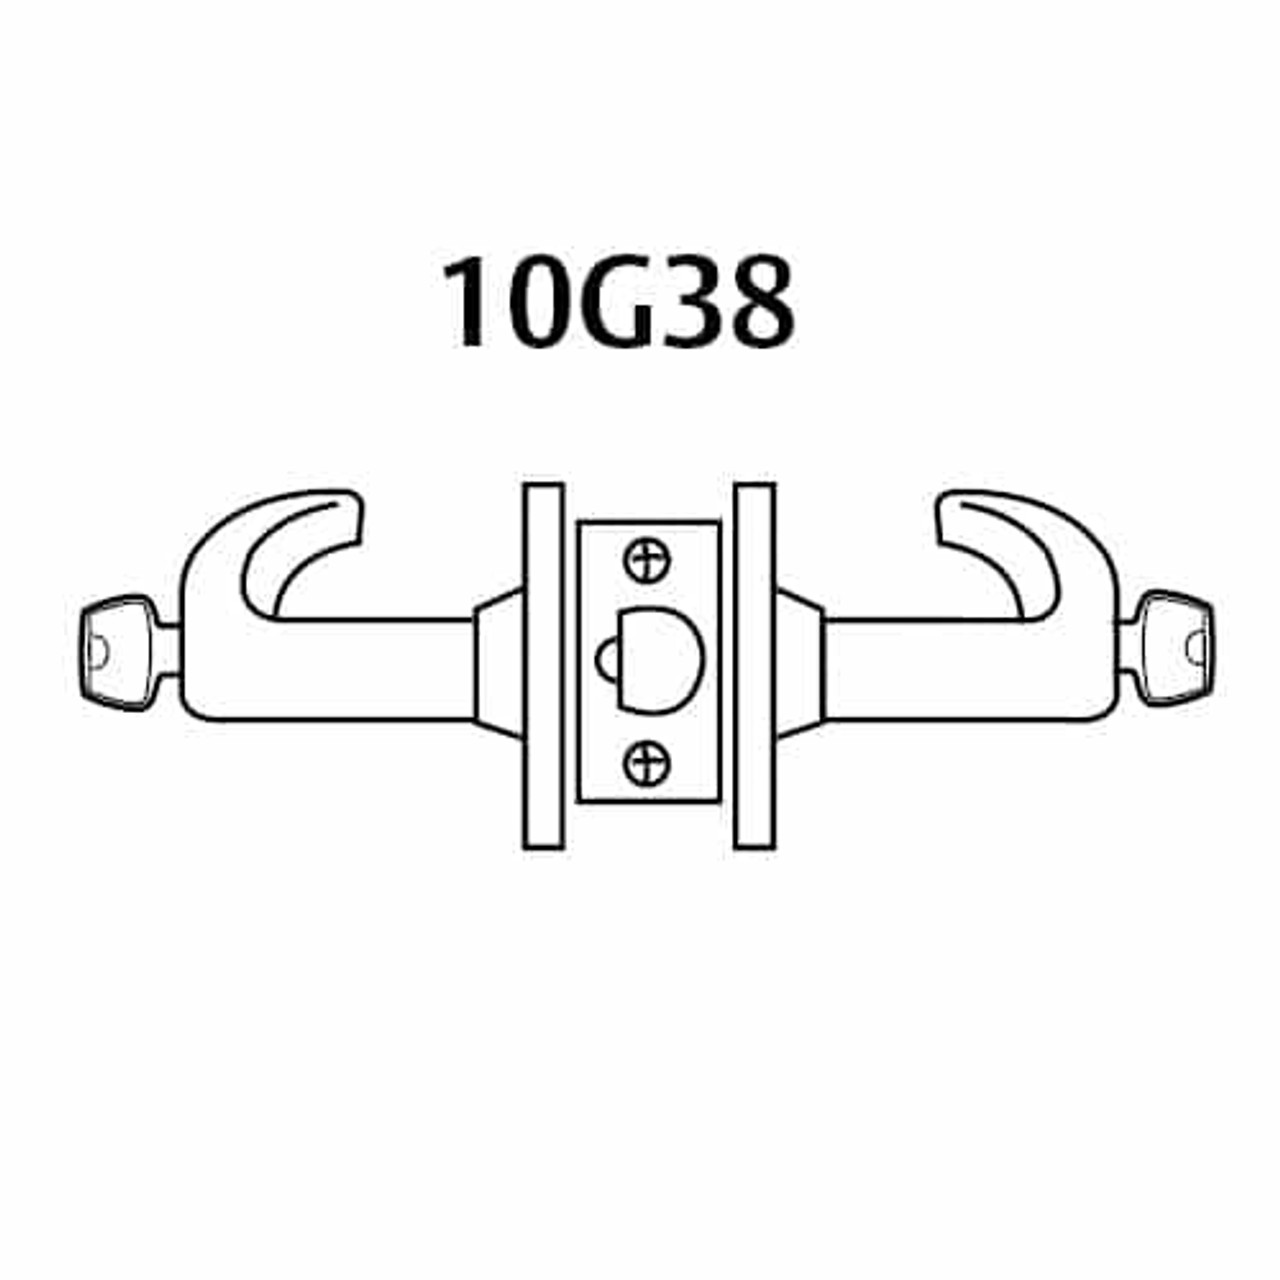 2860-10G38-LJ-10B Sargent 10 Line Cylindrical Classroom Locks with J Lever Design and L Rose Prepped for LFIC in Oxidized Dull Bronze